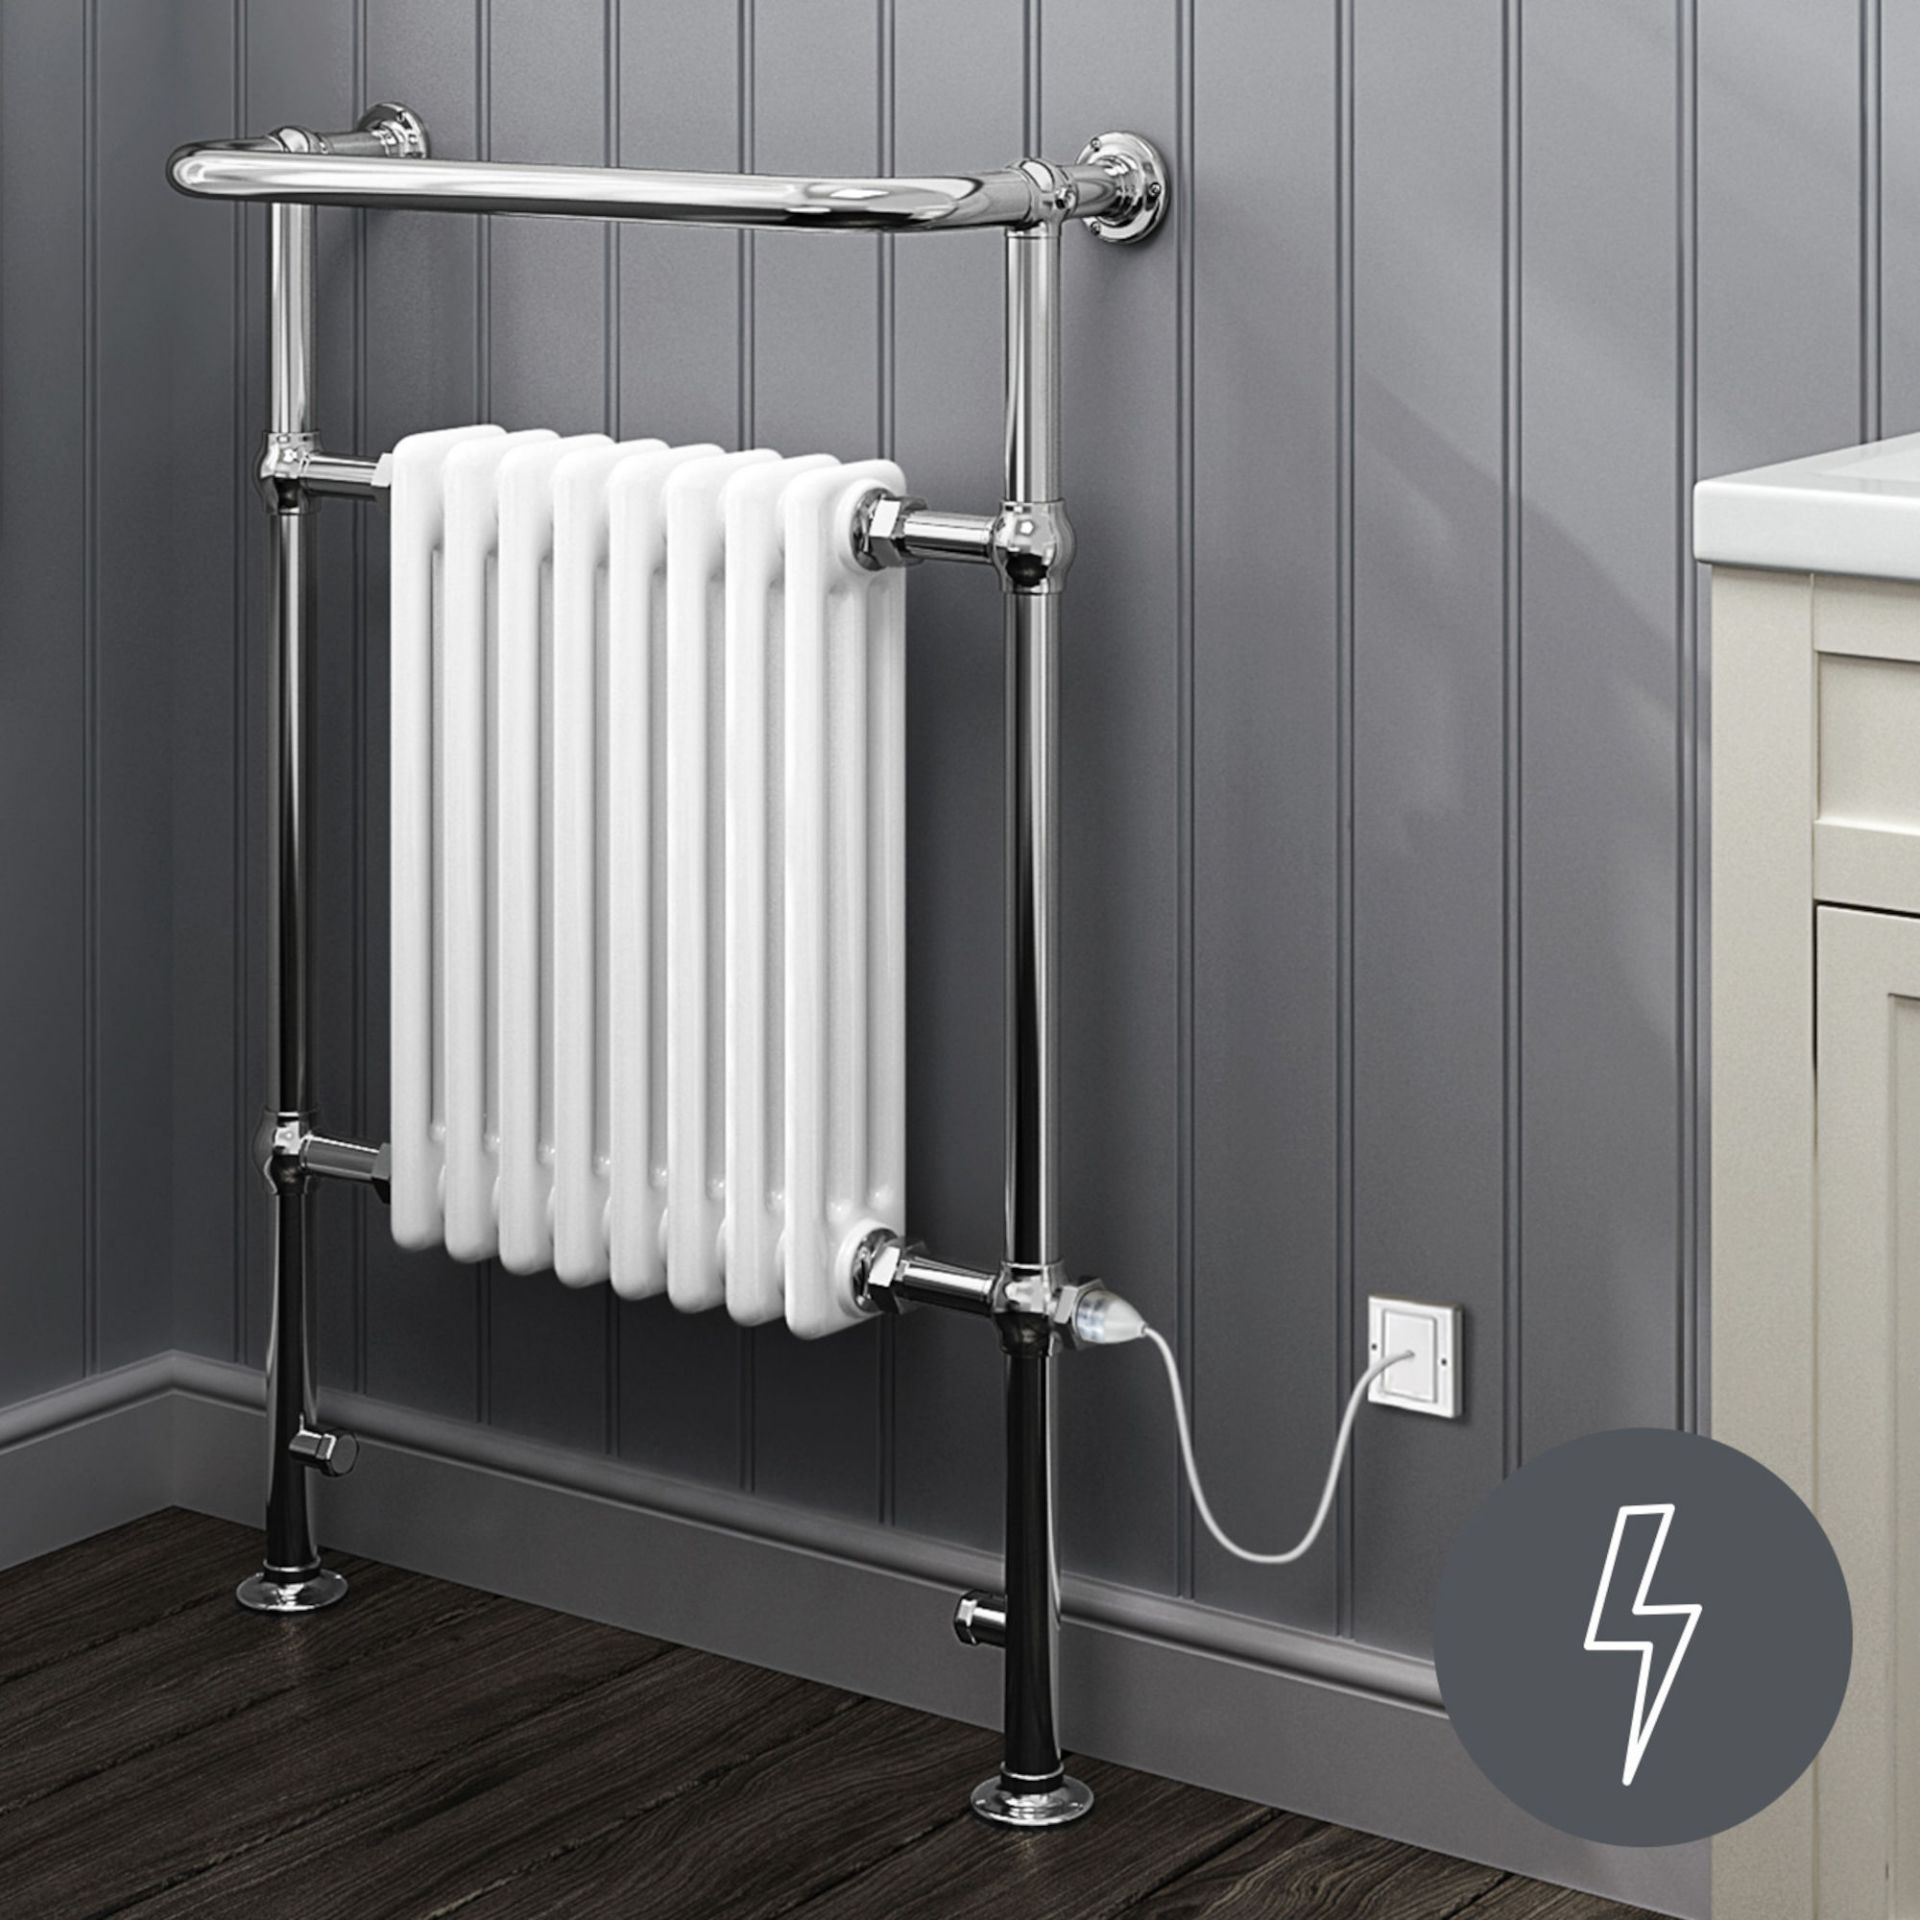 (G17) 952x659mm Large Electric Traditional Wall Mounted Rail Radiator- Cambridge. RRP £359.99....